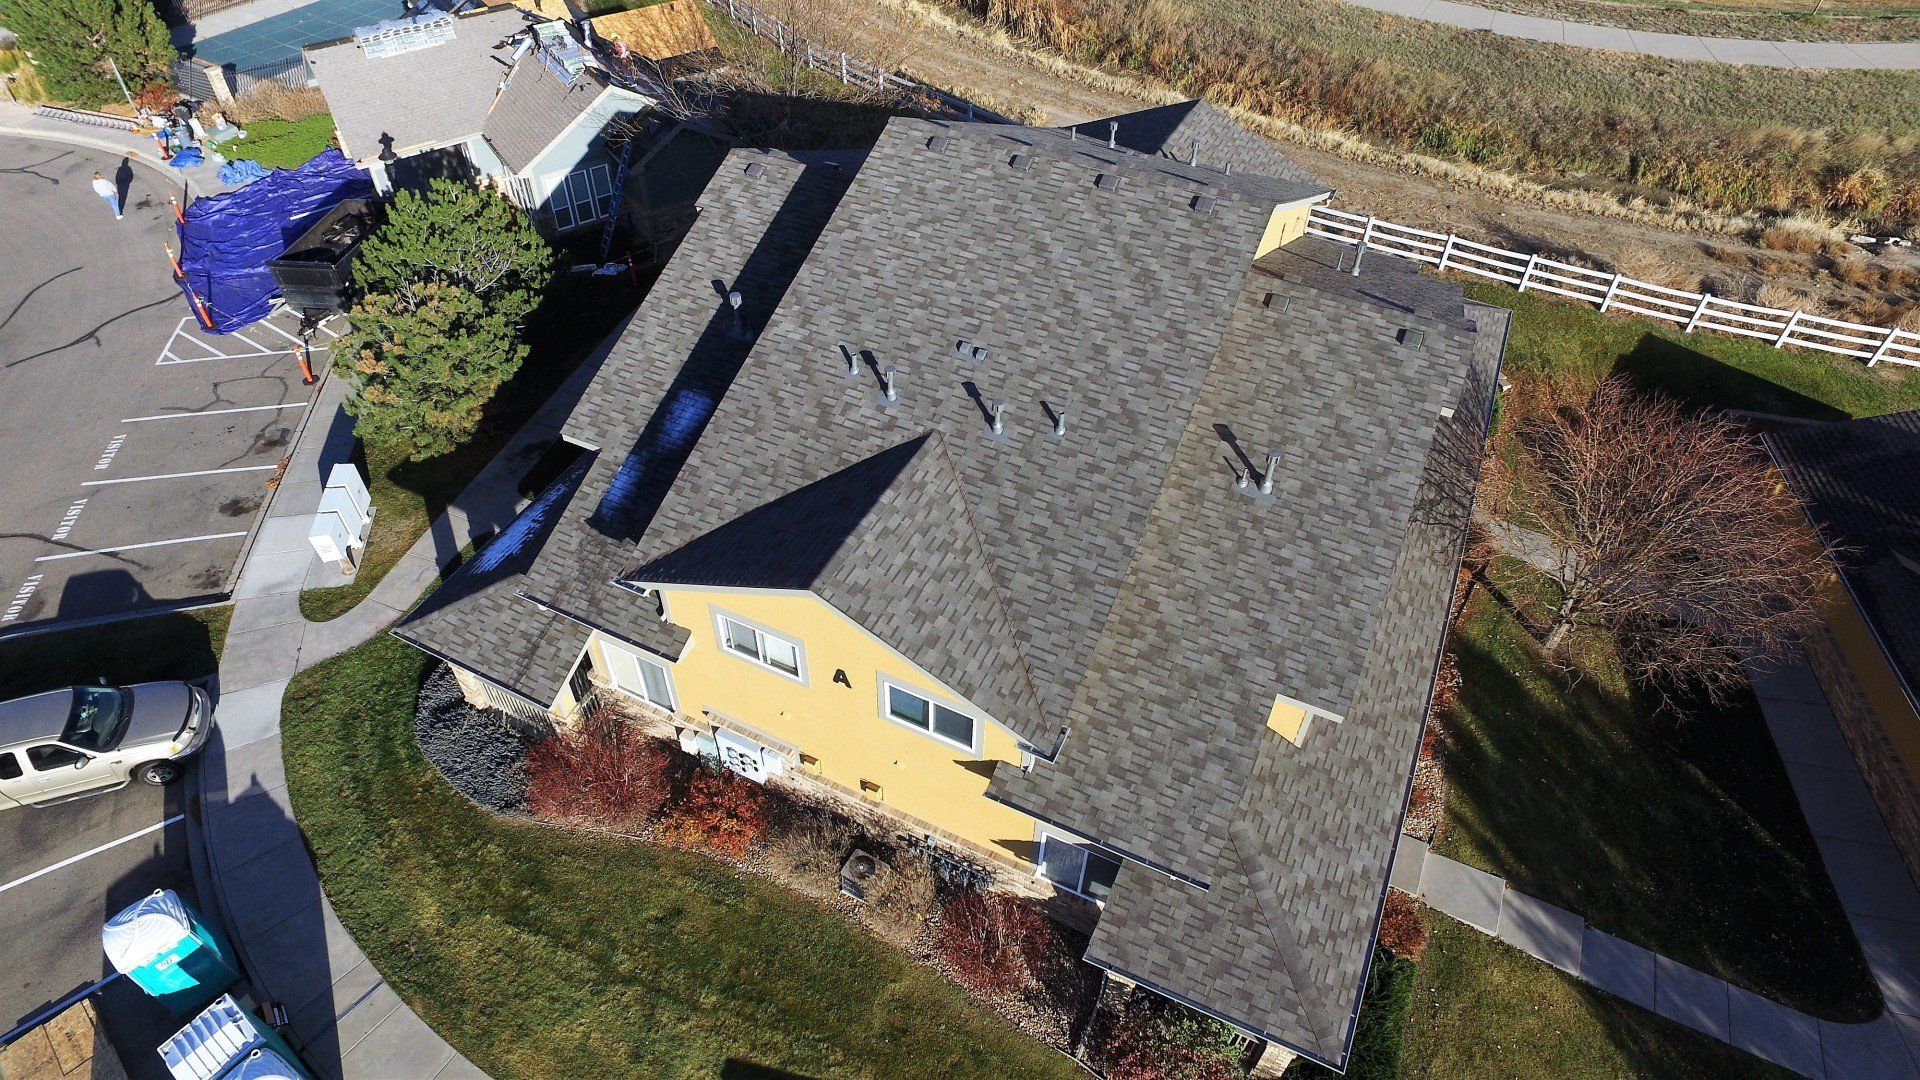 A freshly installed roof by Heritage Roofing & Contracting (aerial view).